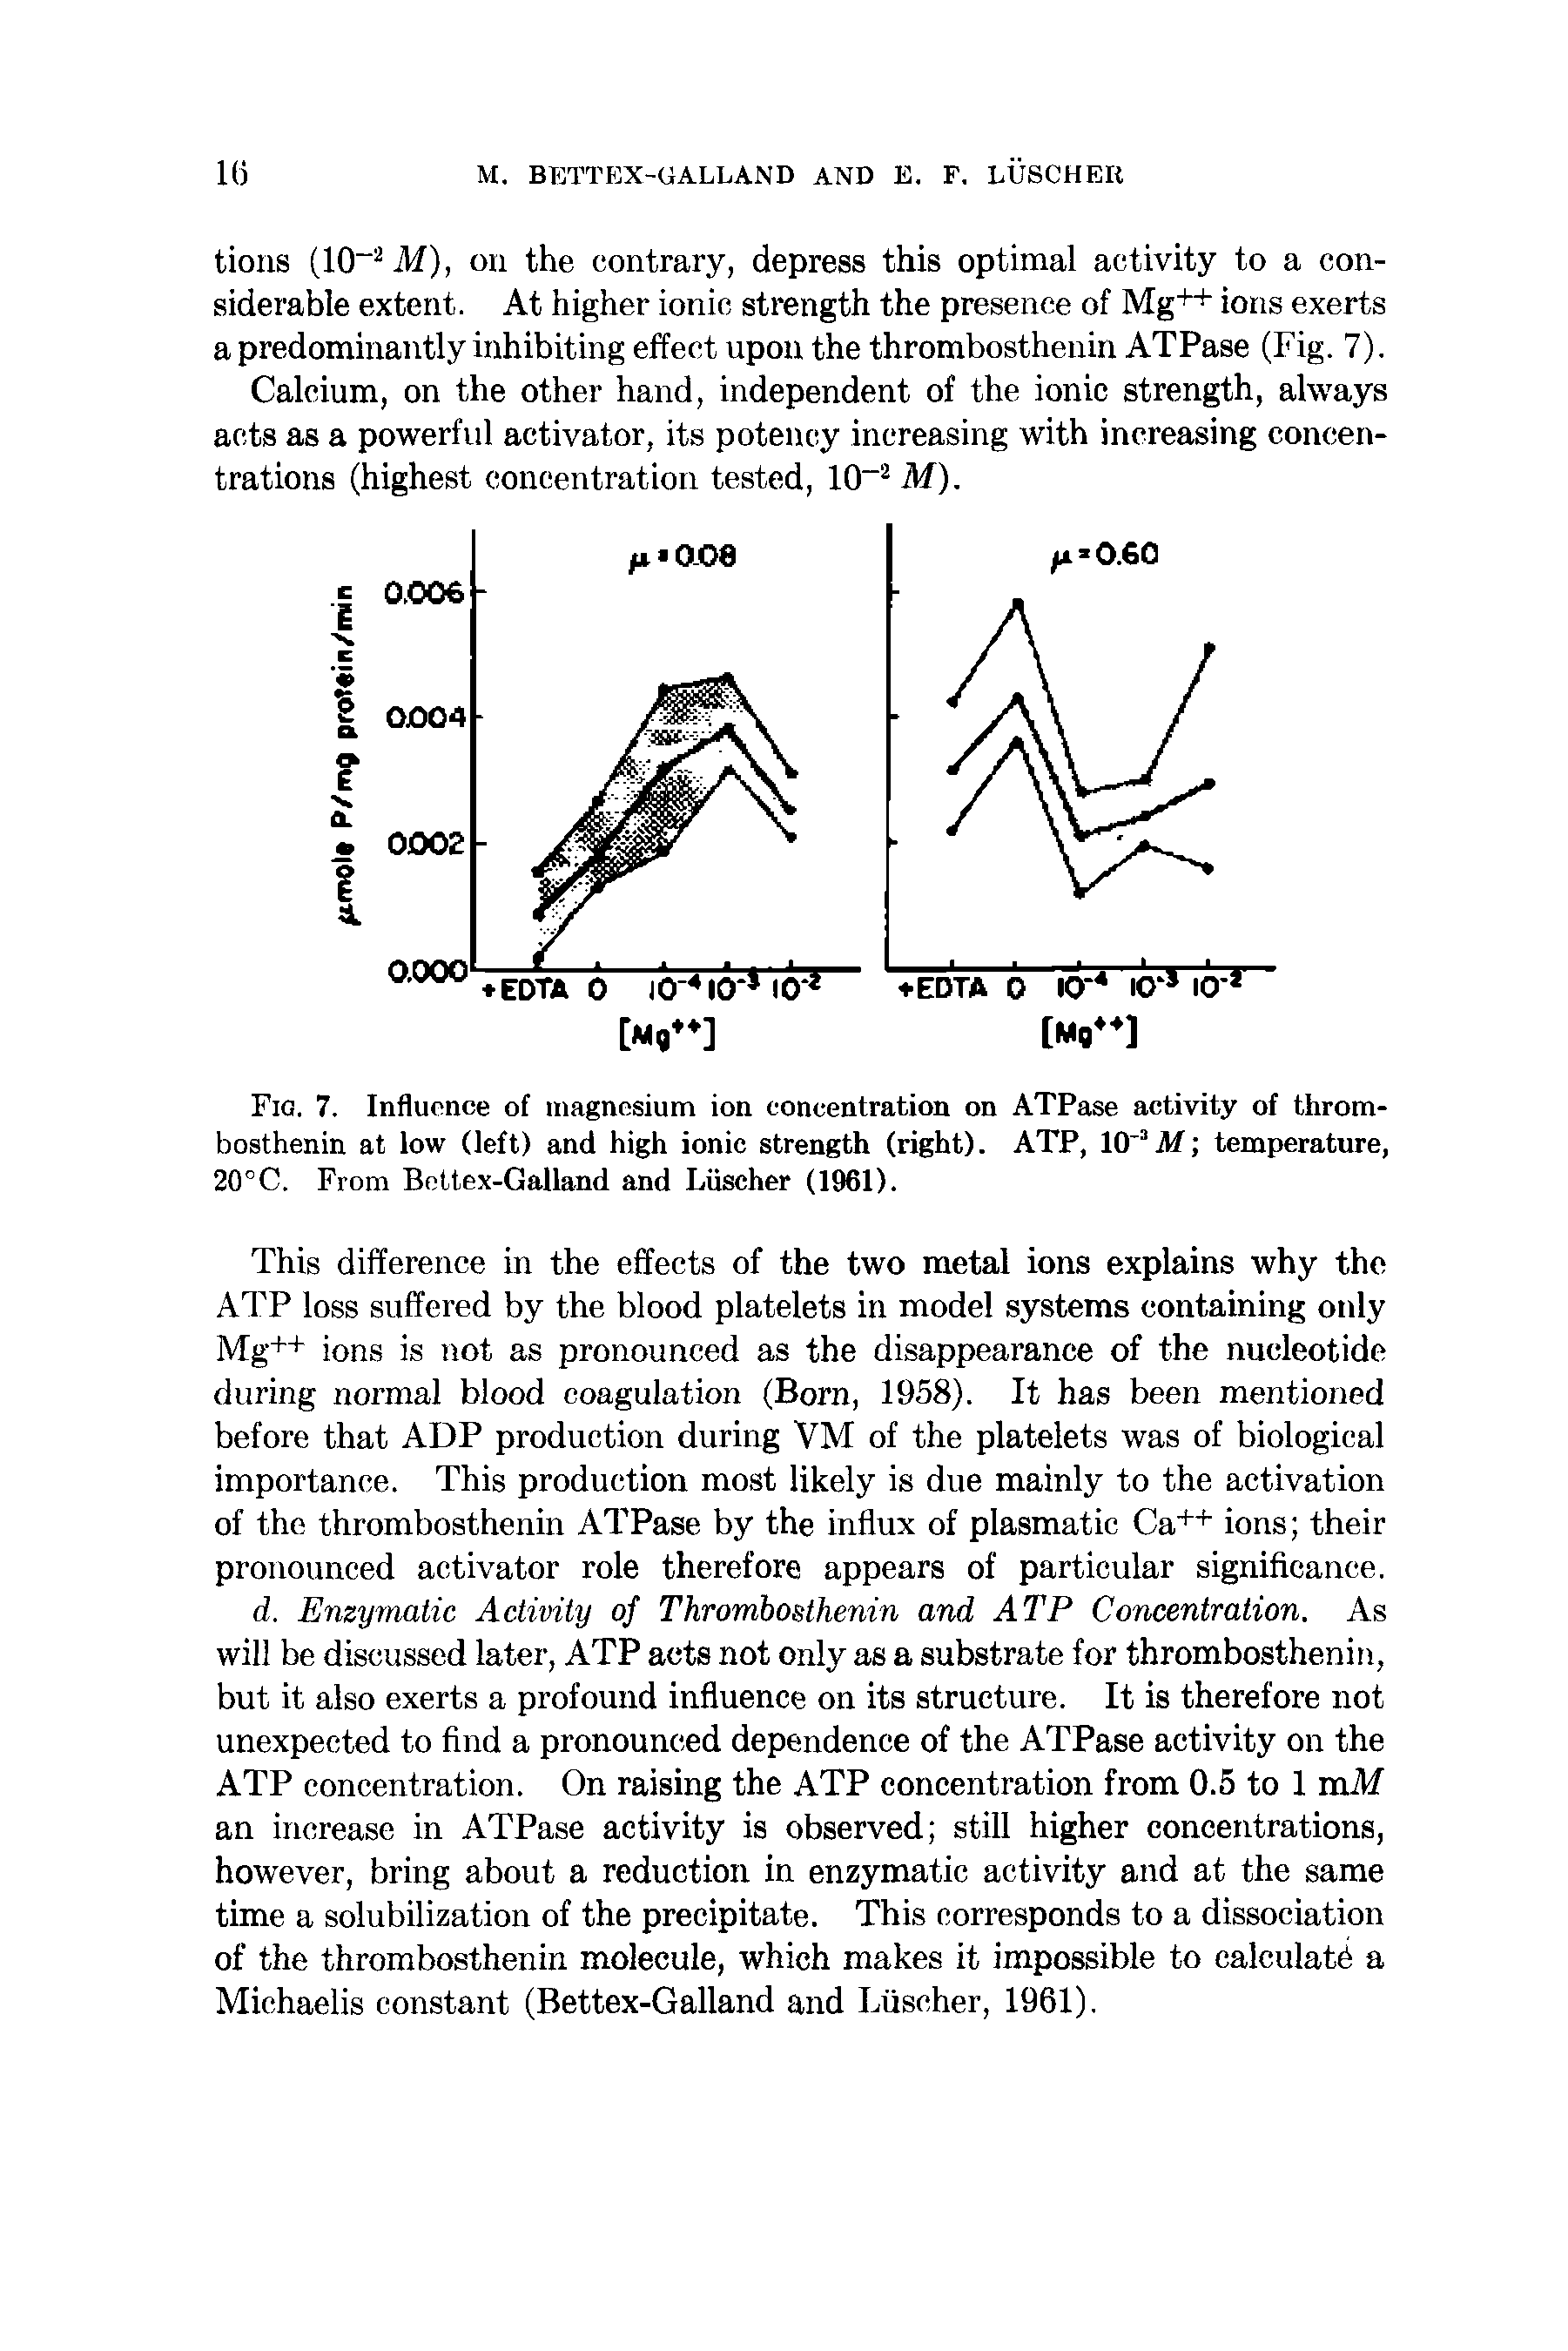 Fig. 7. Influence of magnesium ion concentration on ATPase activity of thrombosthenin at low (left) and high ionic strength (right). ATP, 10 Af temperature, 20°C. From Beltex-Galland and Luscher (1961).